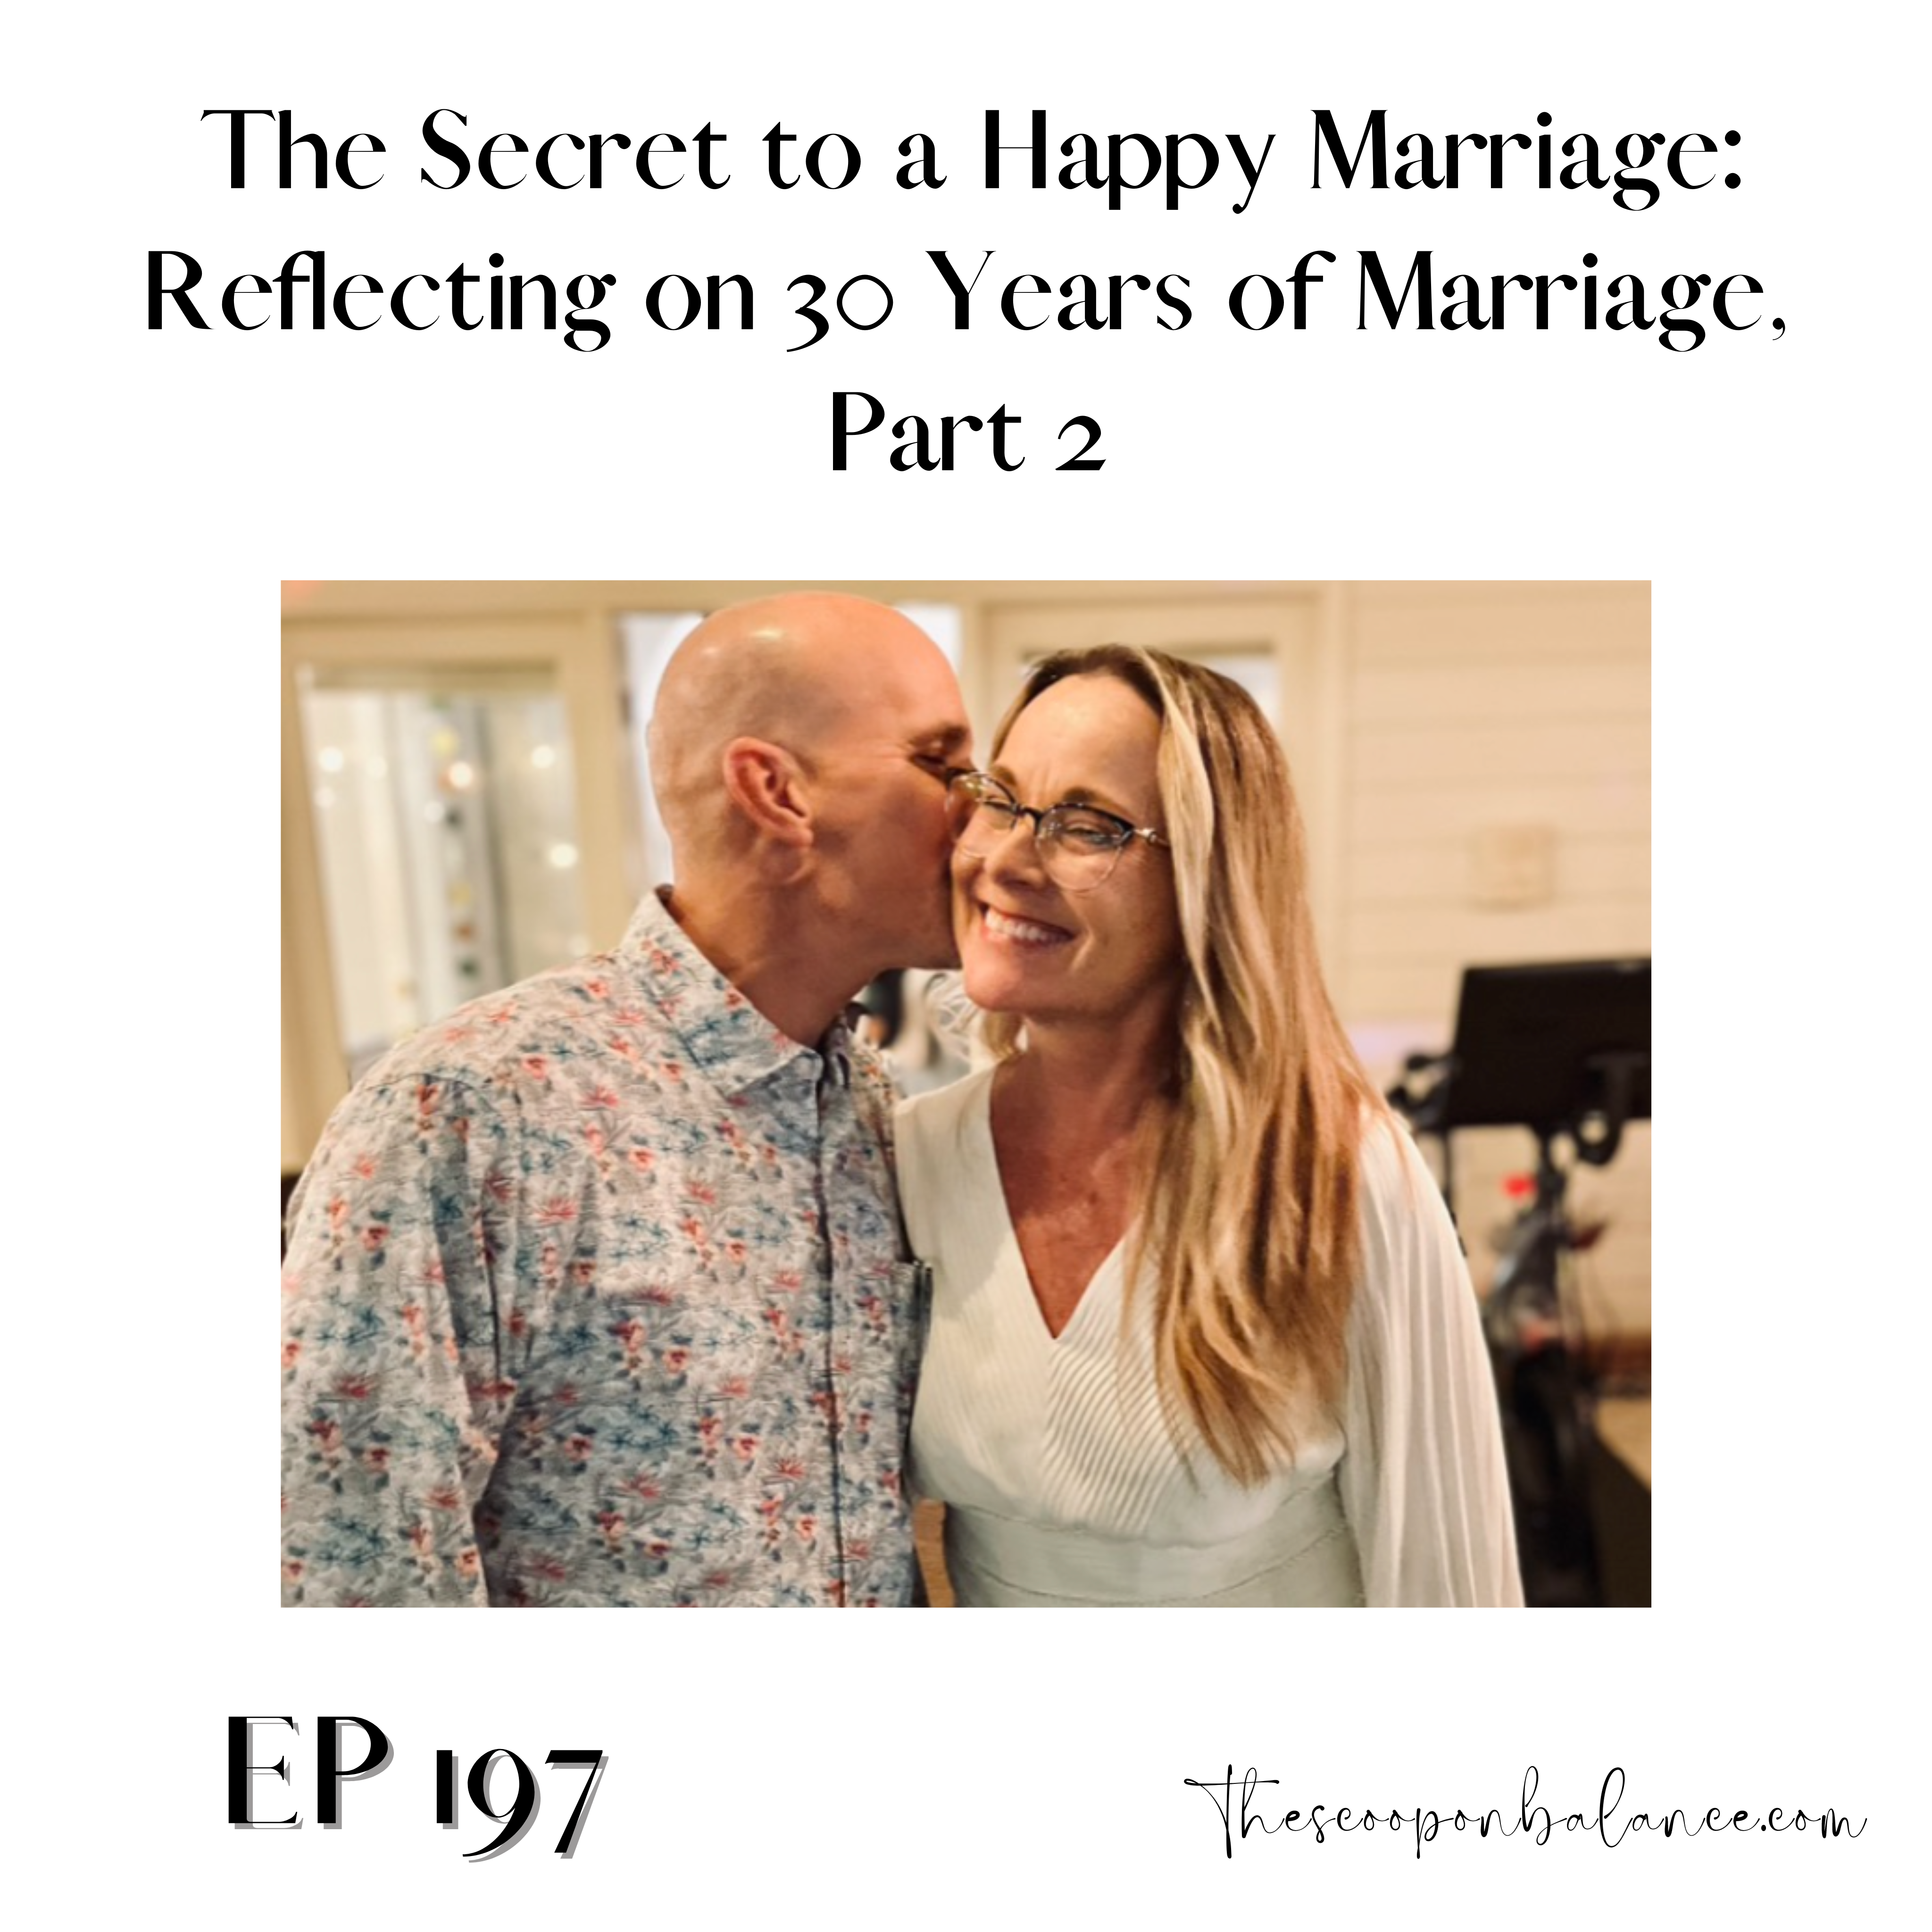 Ep 197 The Secret to a Happy Marriage: Reflecting on 30 Years of Marriage, Part 2